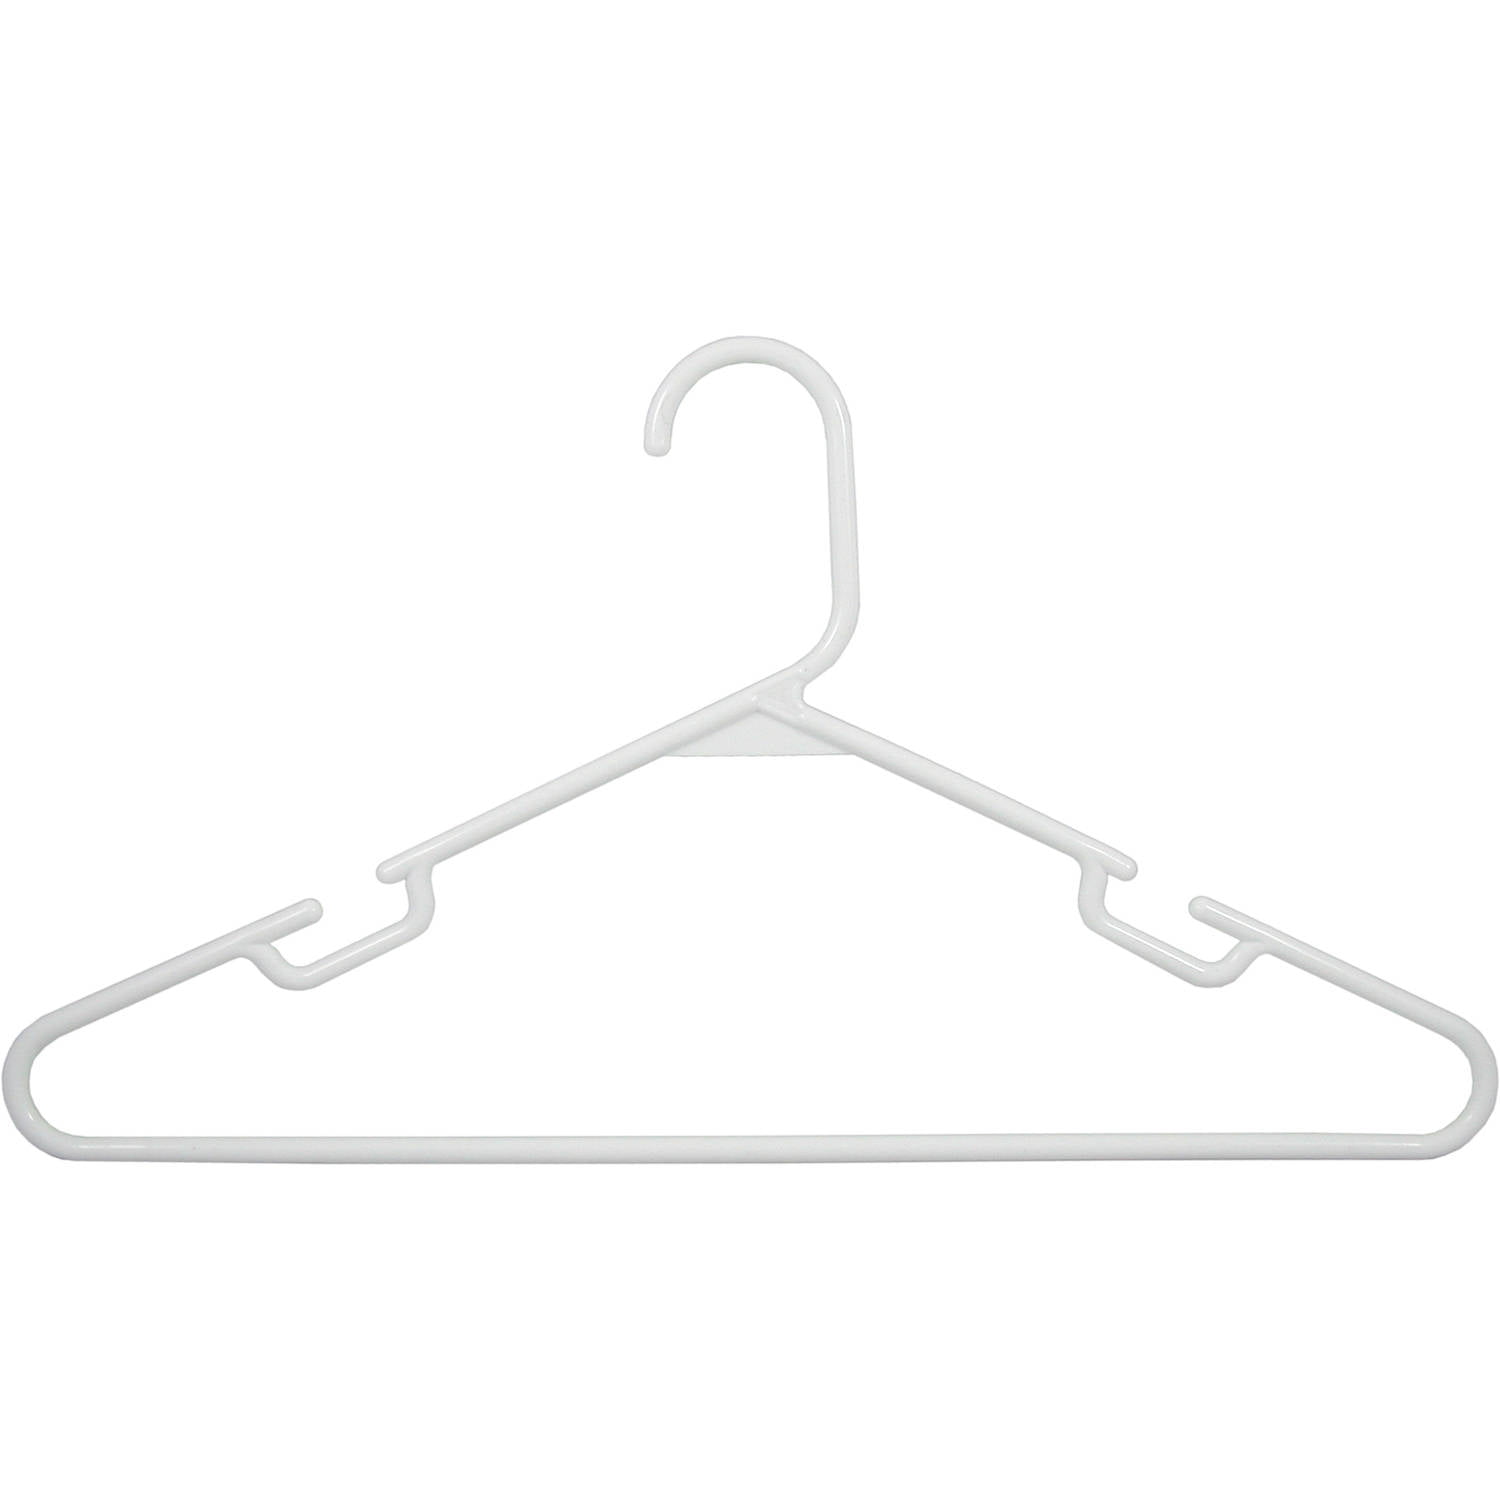 Wisconic Adult Plastic Clothing Hanger, Slotted for Strappy Shirts